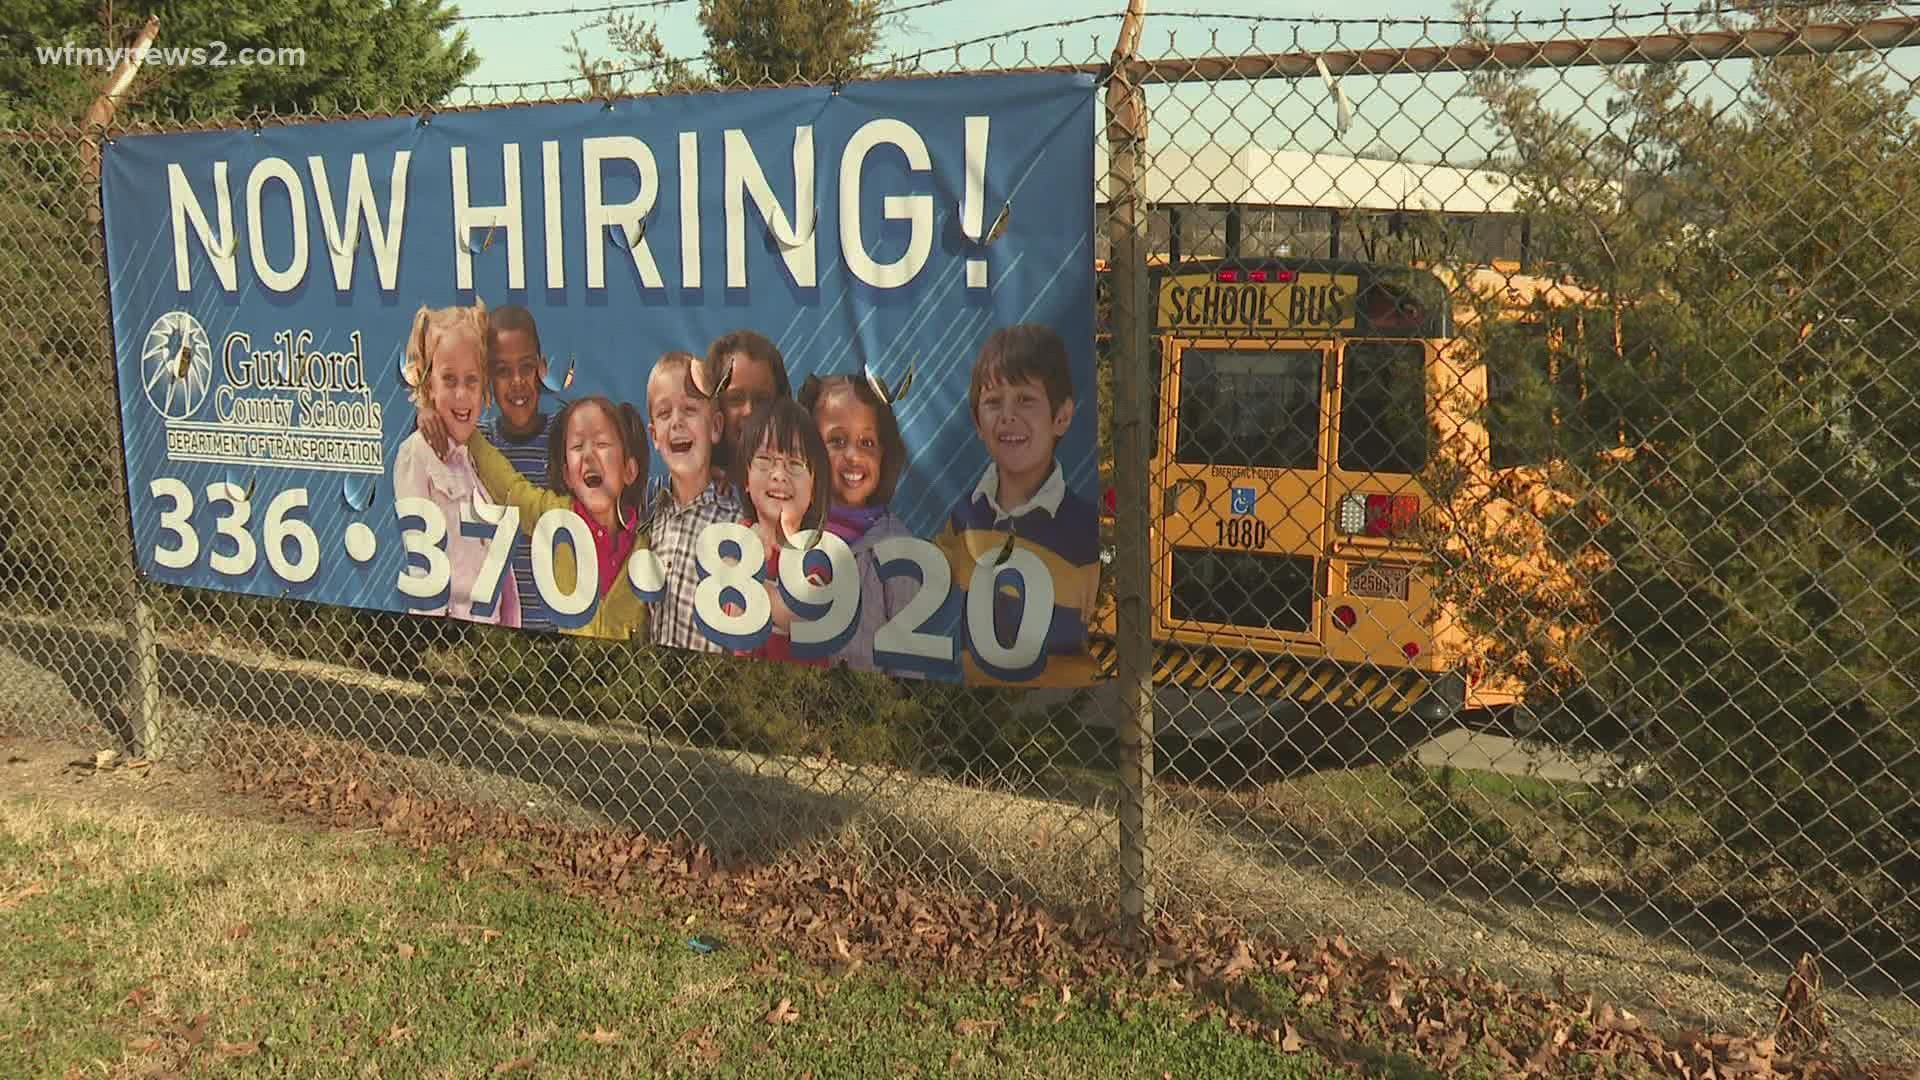 The Guilford County Schools district raised the bonus amount from $100 to $1,000 for drivers who work every day for a month.